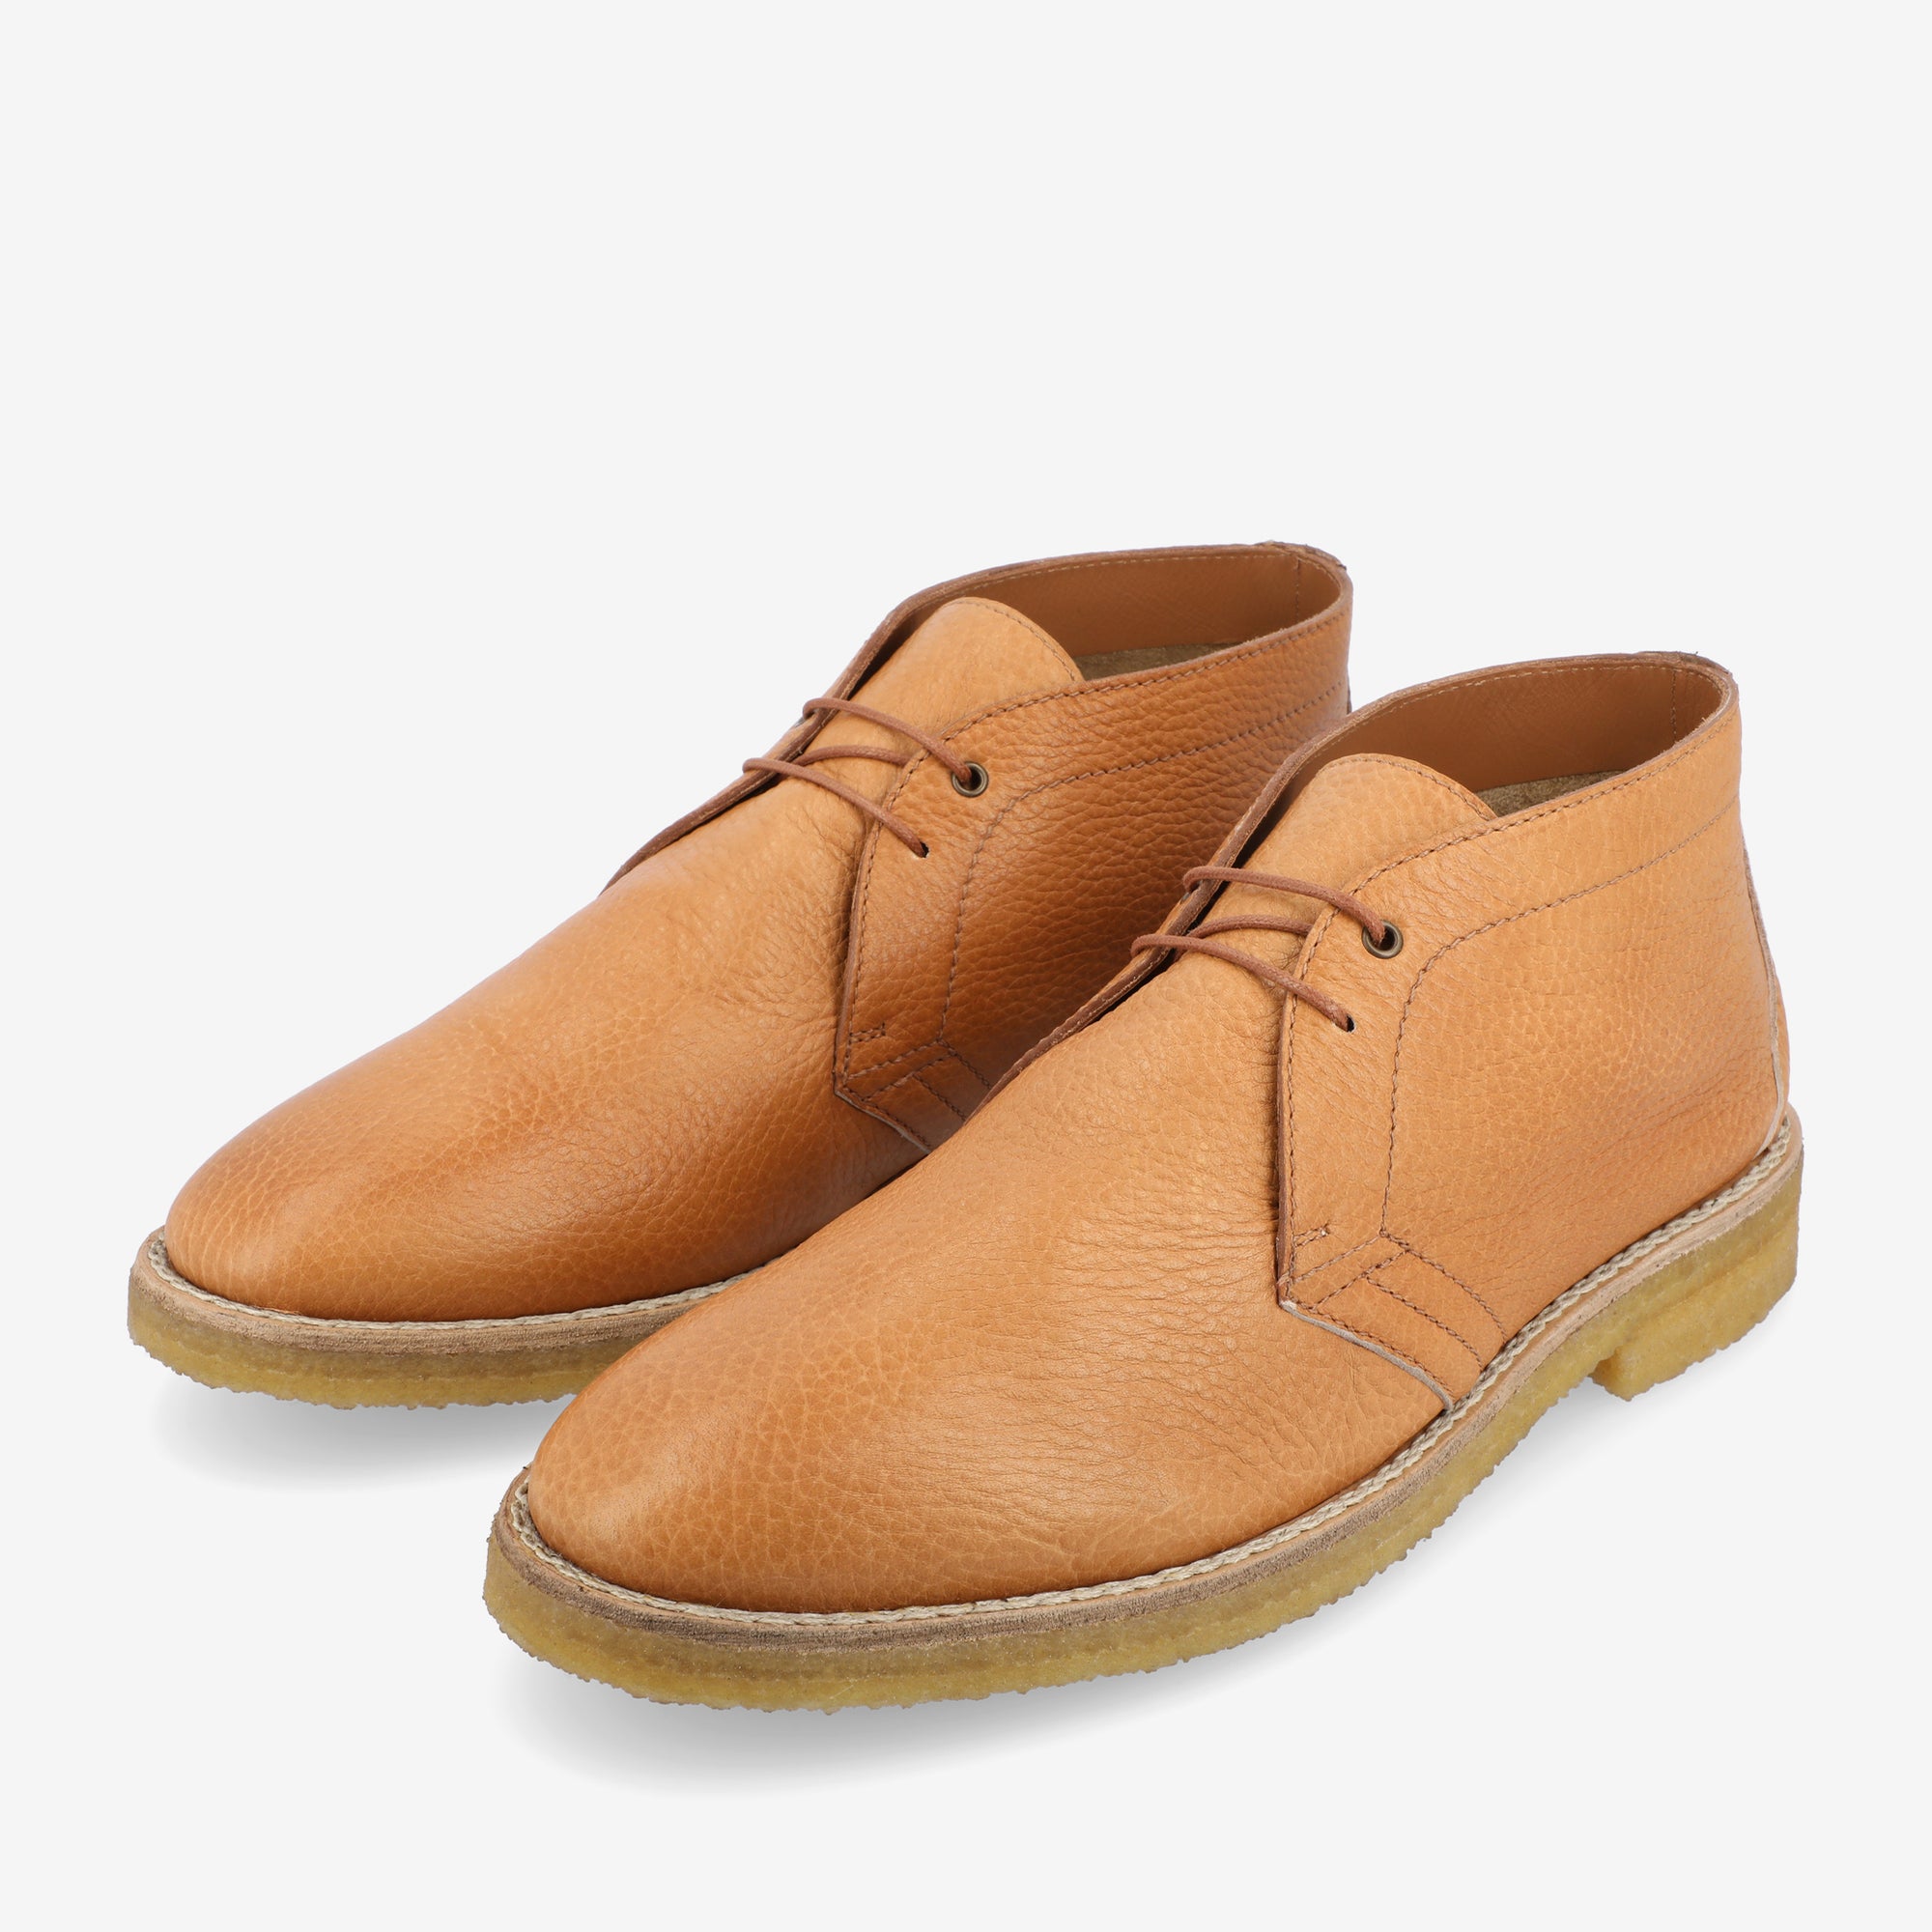 The Chukka Boot in Honey (Last Chance, Final Sale)